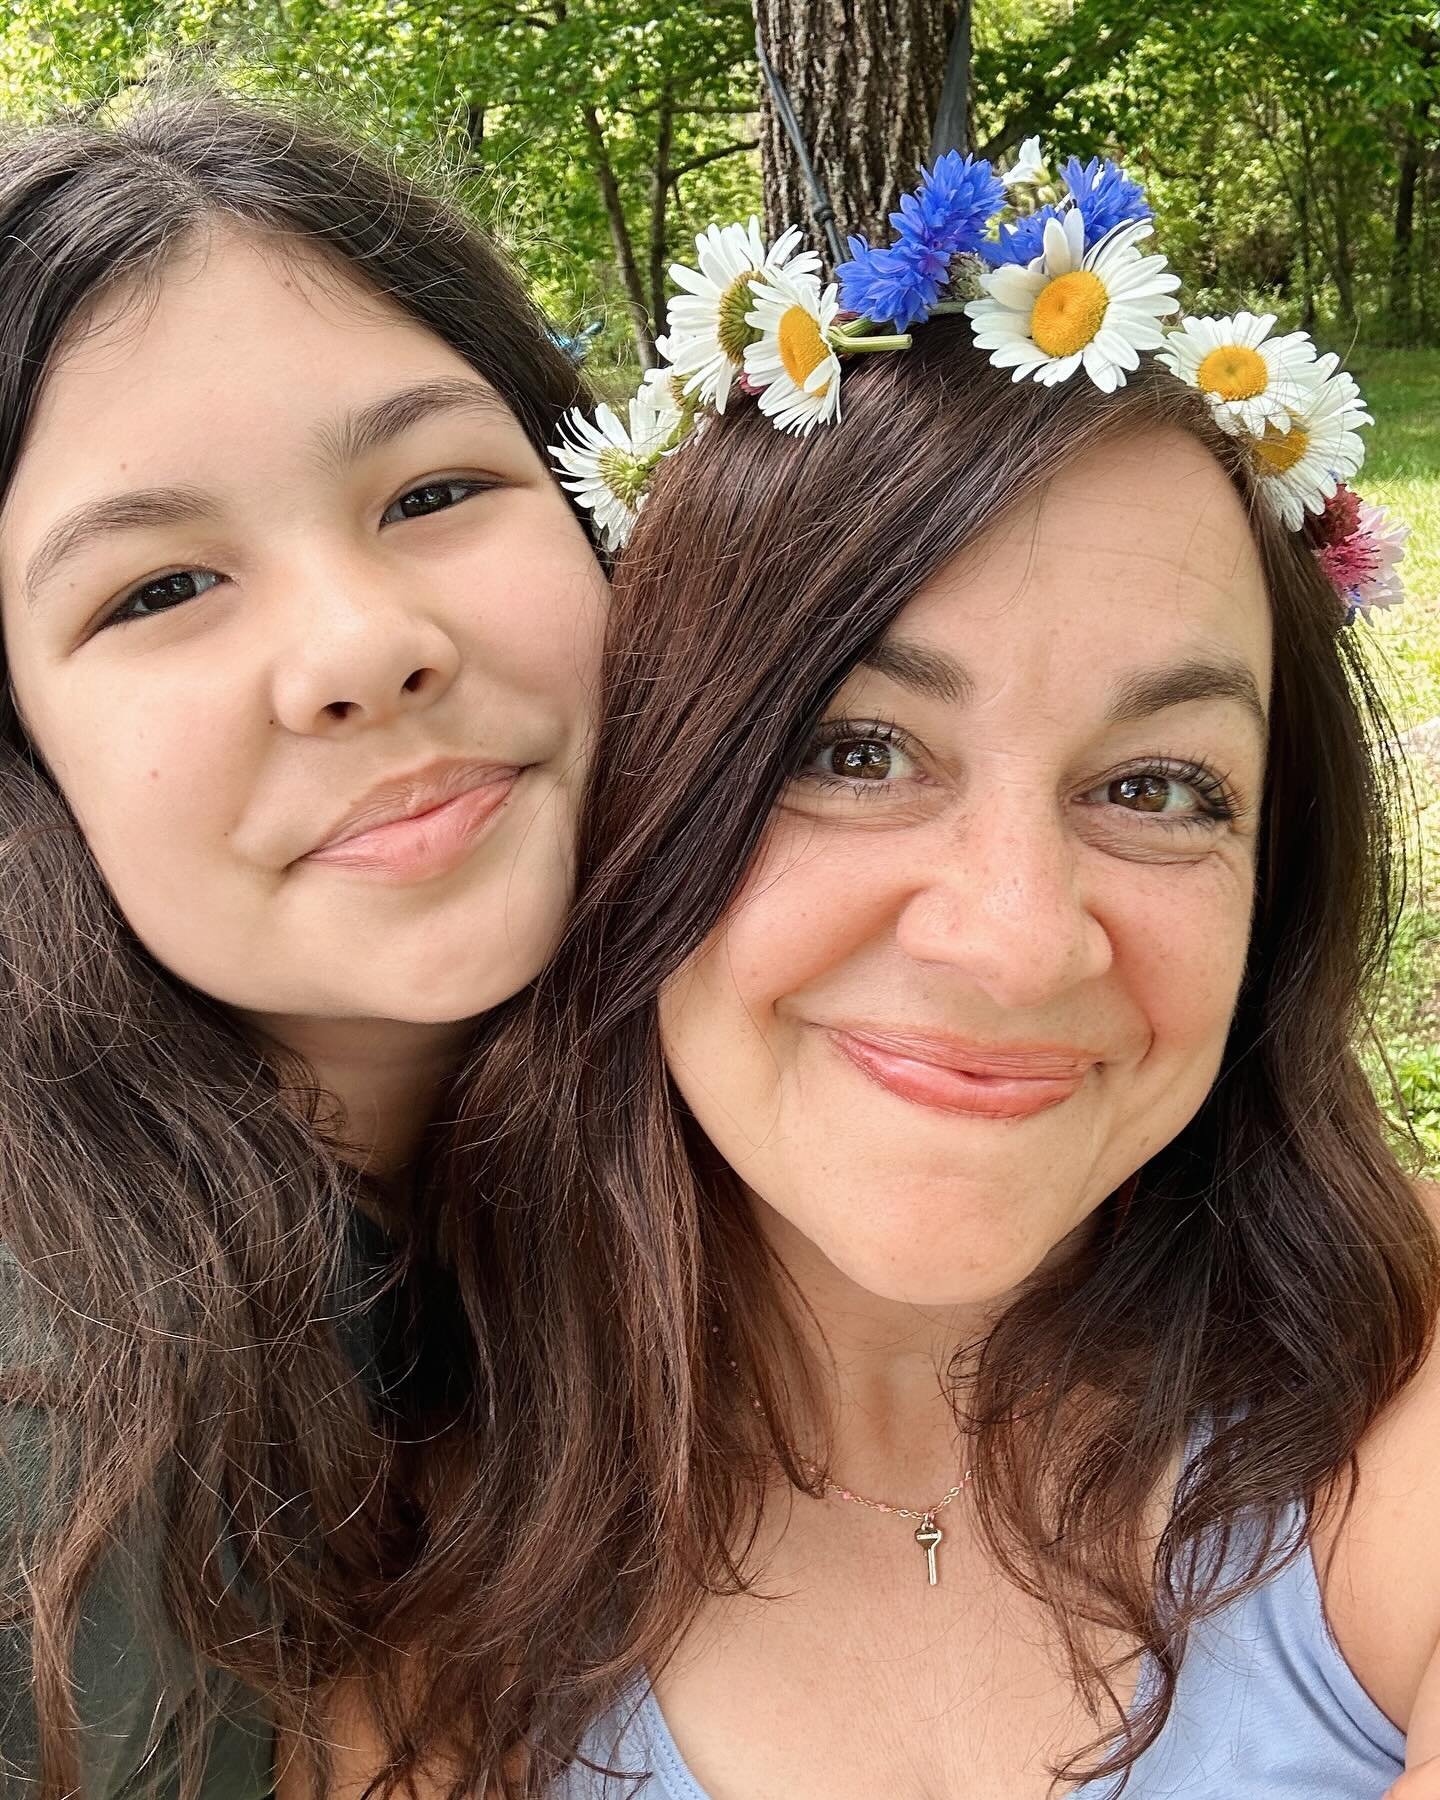 When your girl makes you a spring flower crown, you wear it with pride. 🌼🌿🌼🌿

#spring #childhoodunplugged #bachelorsbuttons #daisies #flowercrown #springflowers #flowerfarmer #motherhoodunplugged #motherhood